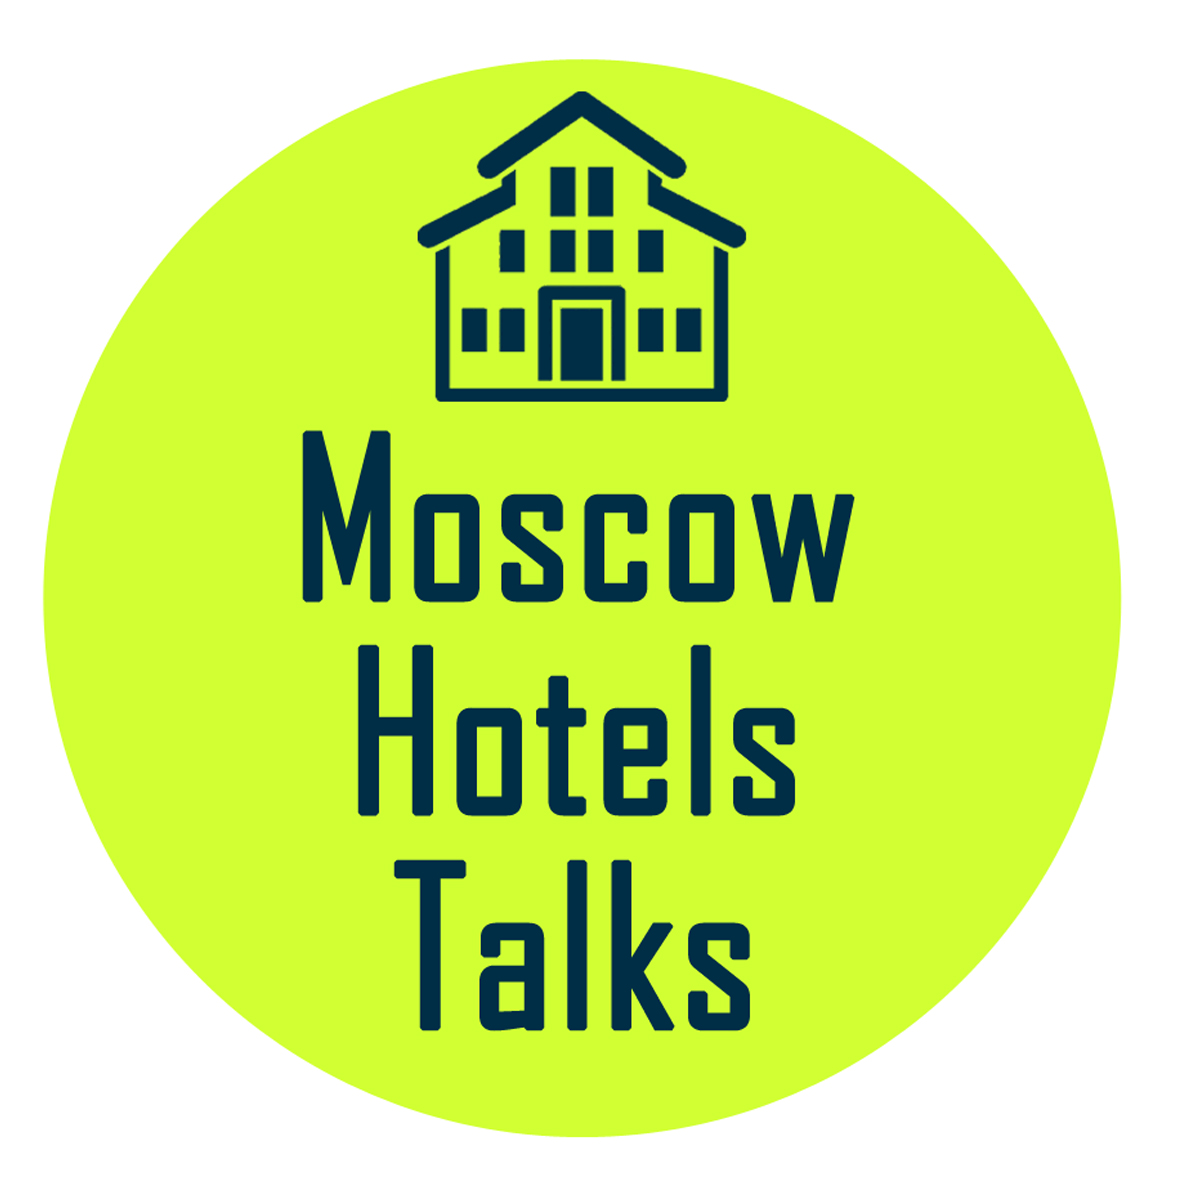 Moscow Hotels Talks